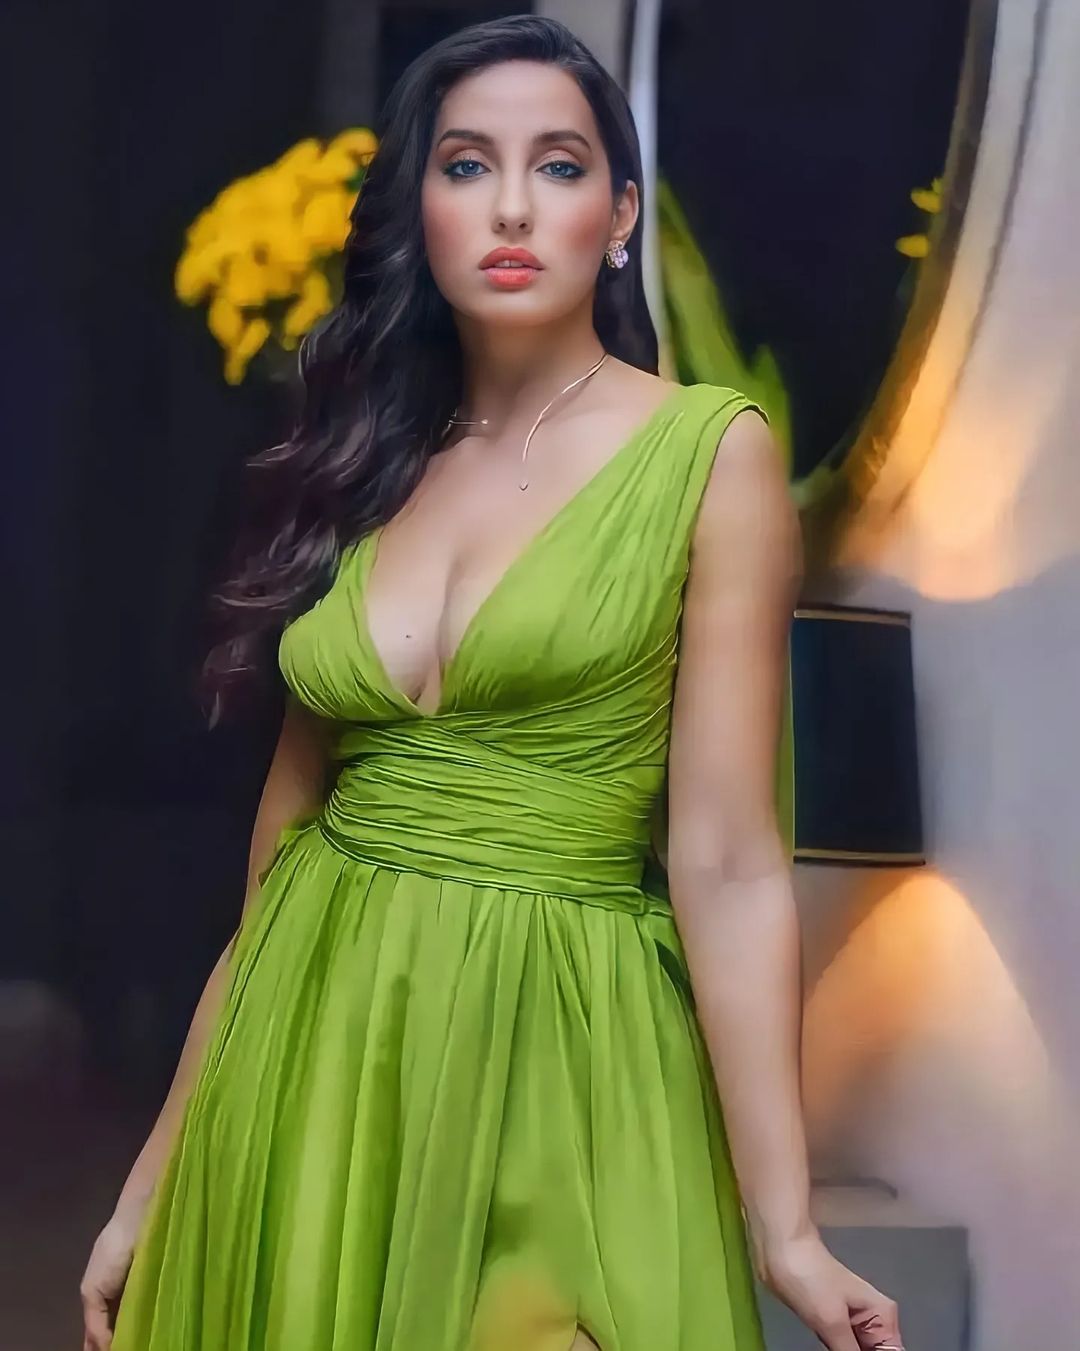 Nora Fatehi wreaked havoc again in a deep neck dress, posing in front of the camera by going braless